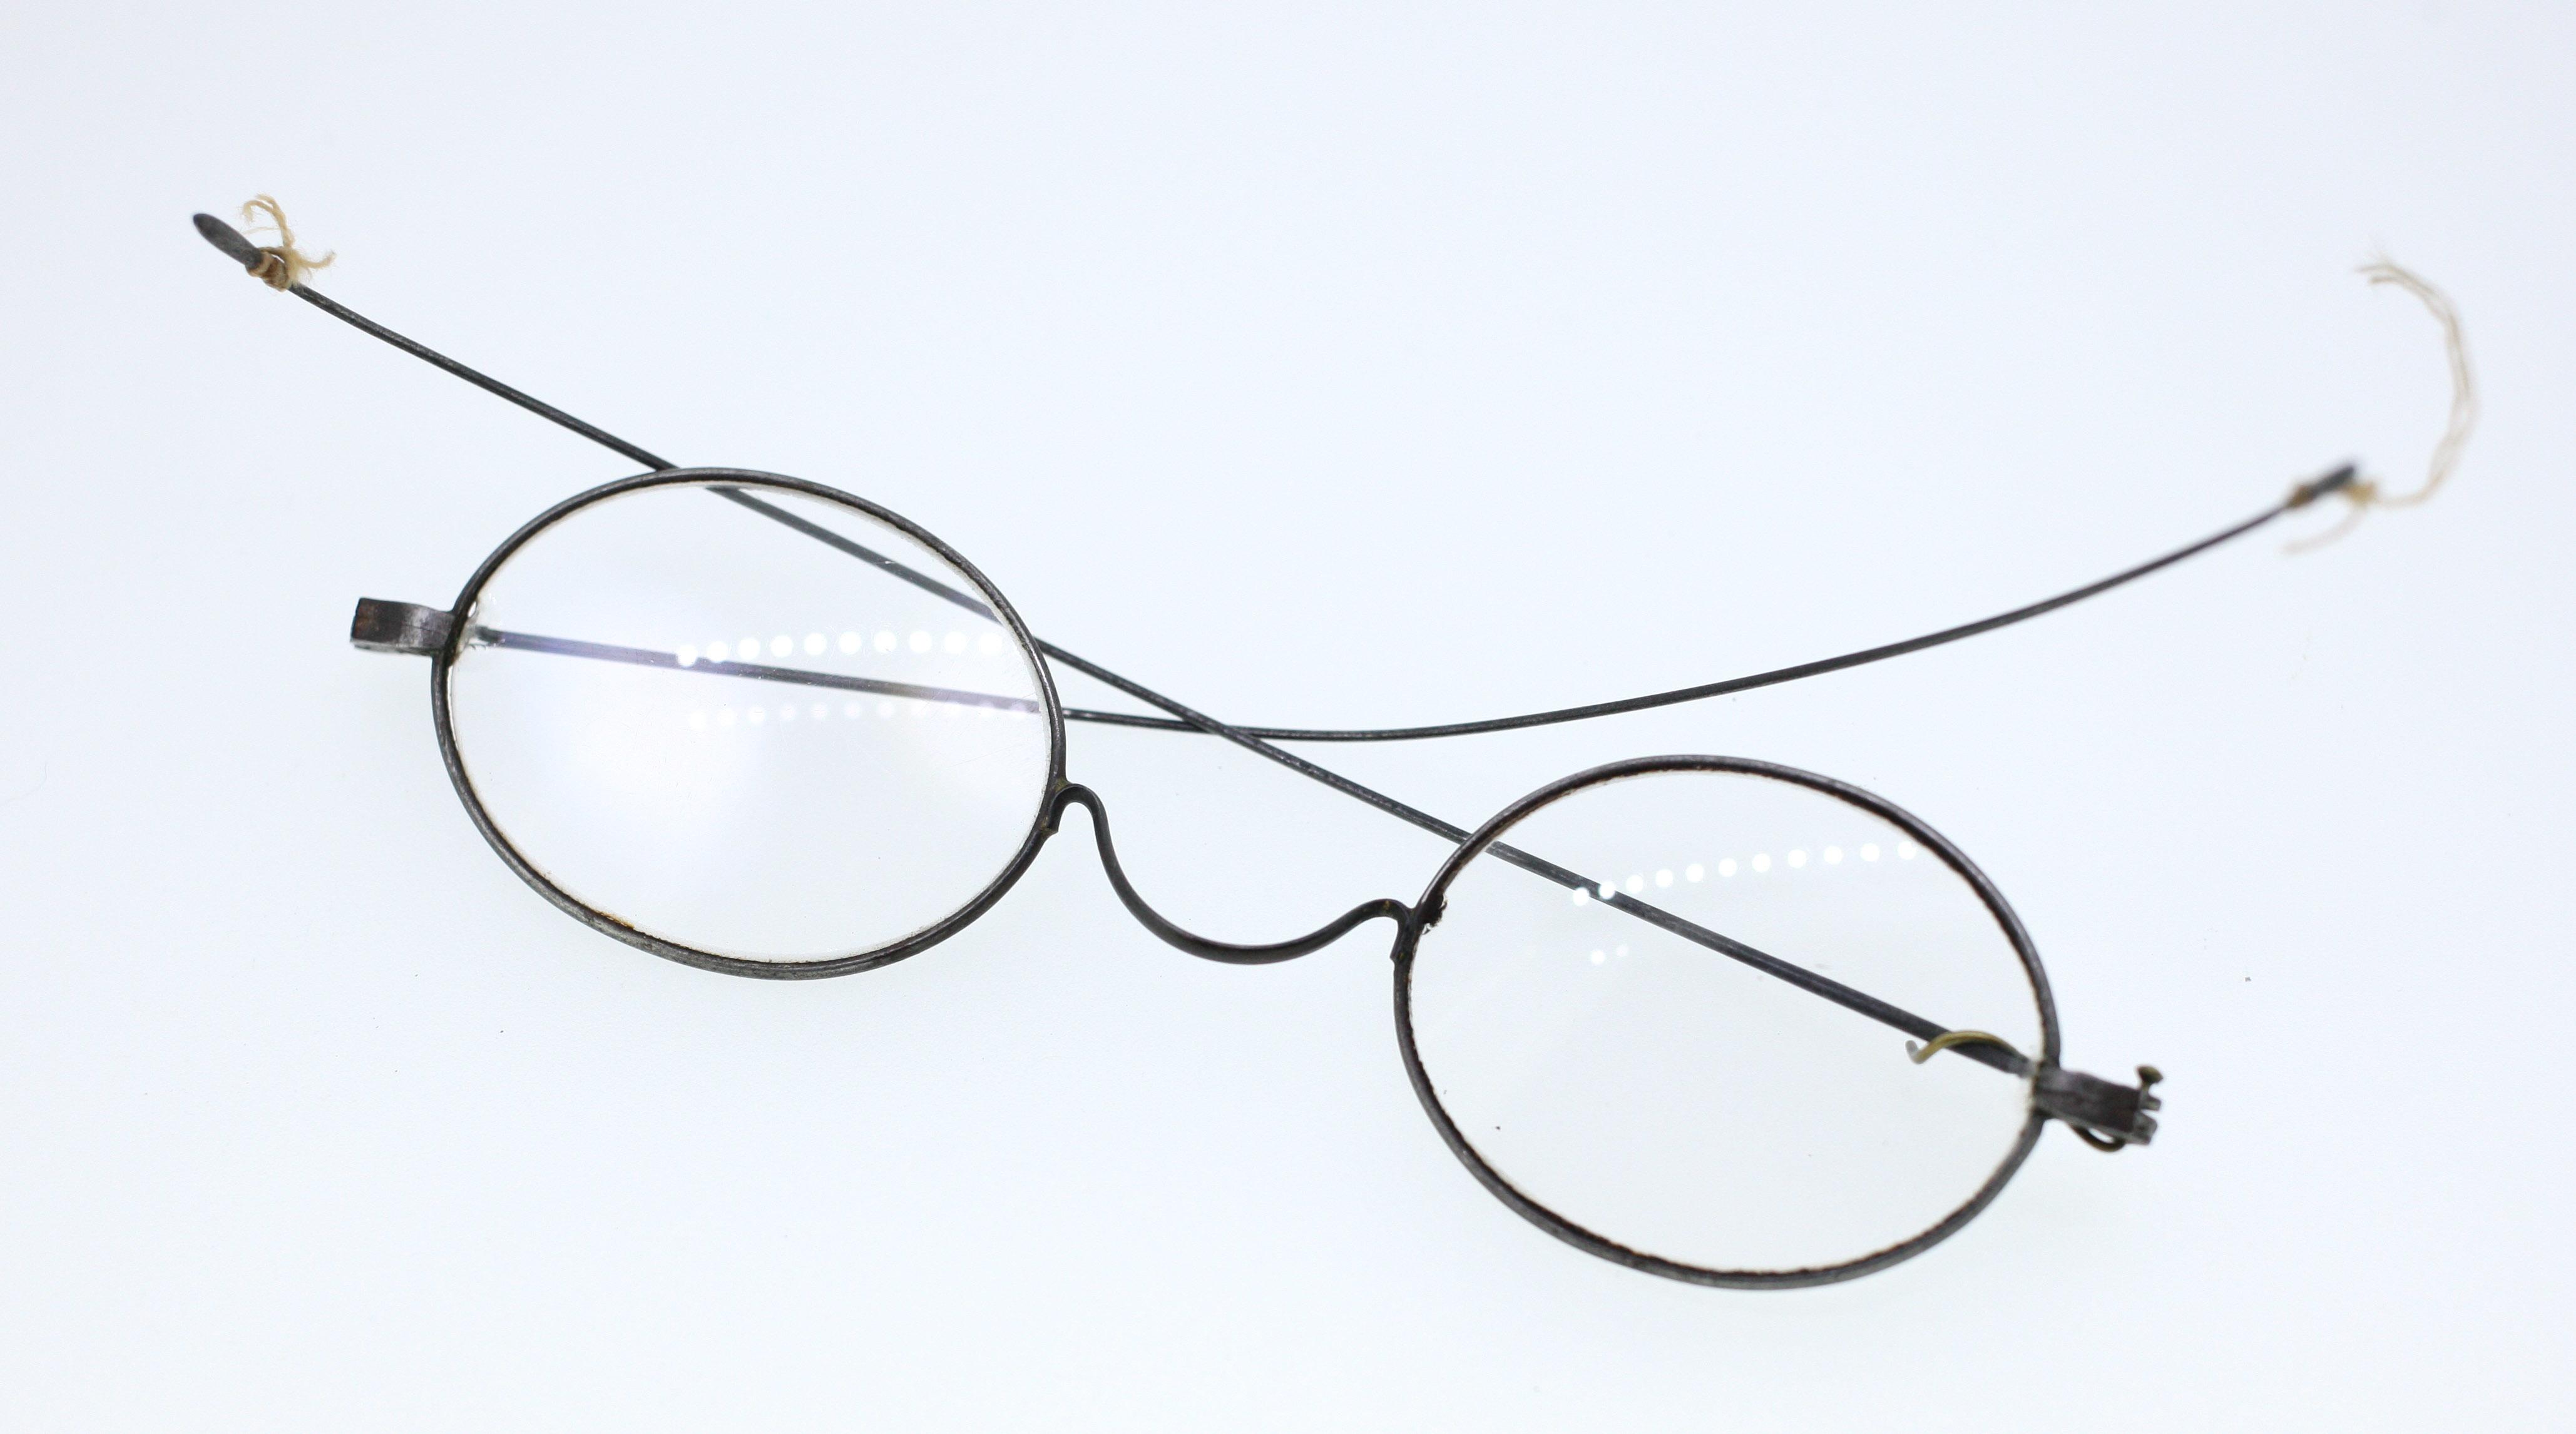 ANTIQUE EYEGLASSES-3 PAIRS-50 to 100 YEARS OLD-USED-FAIR CONDITION ...